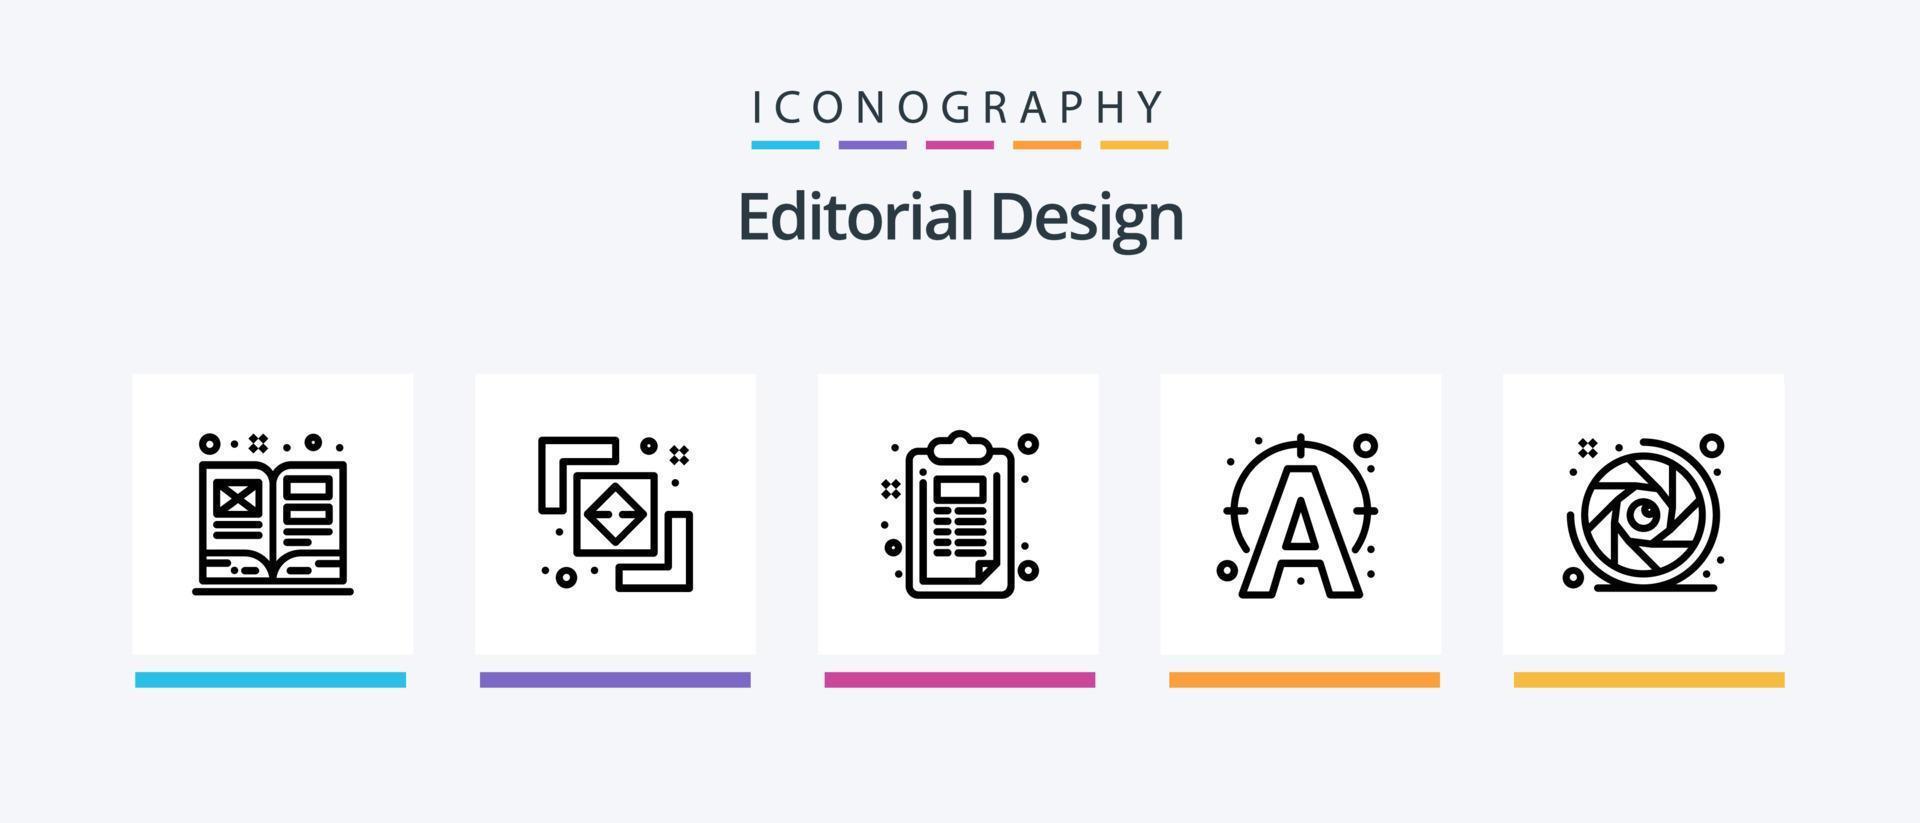 Editorial Design Line 5 Icon Pack Including document. creative. chart. connect. text. Creative Icons Design vector